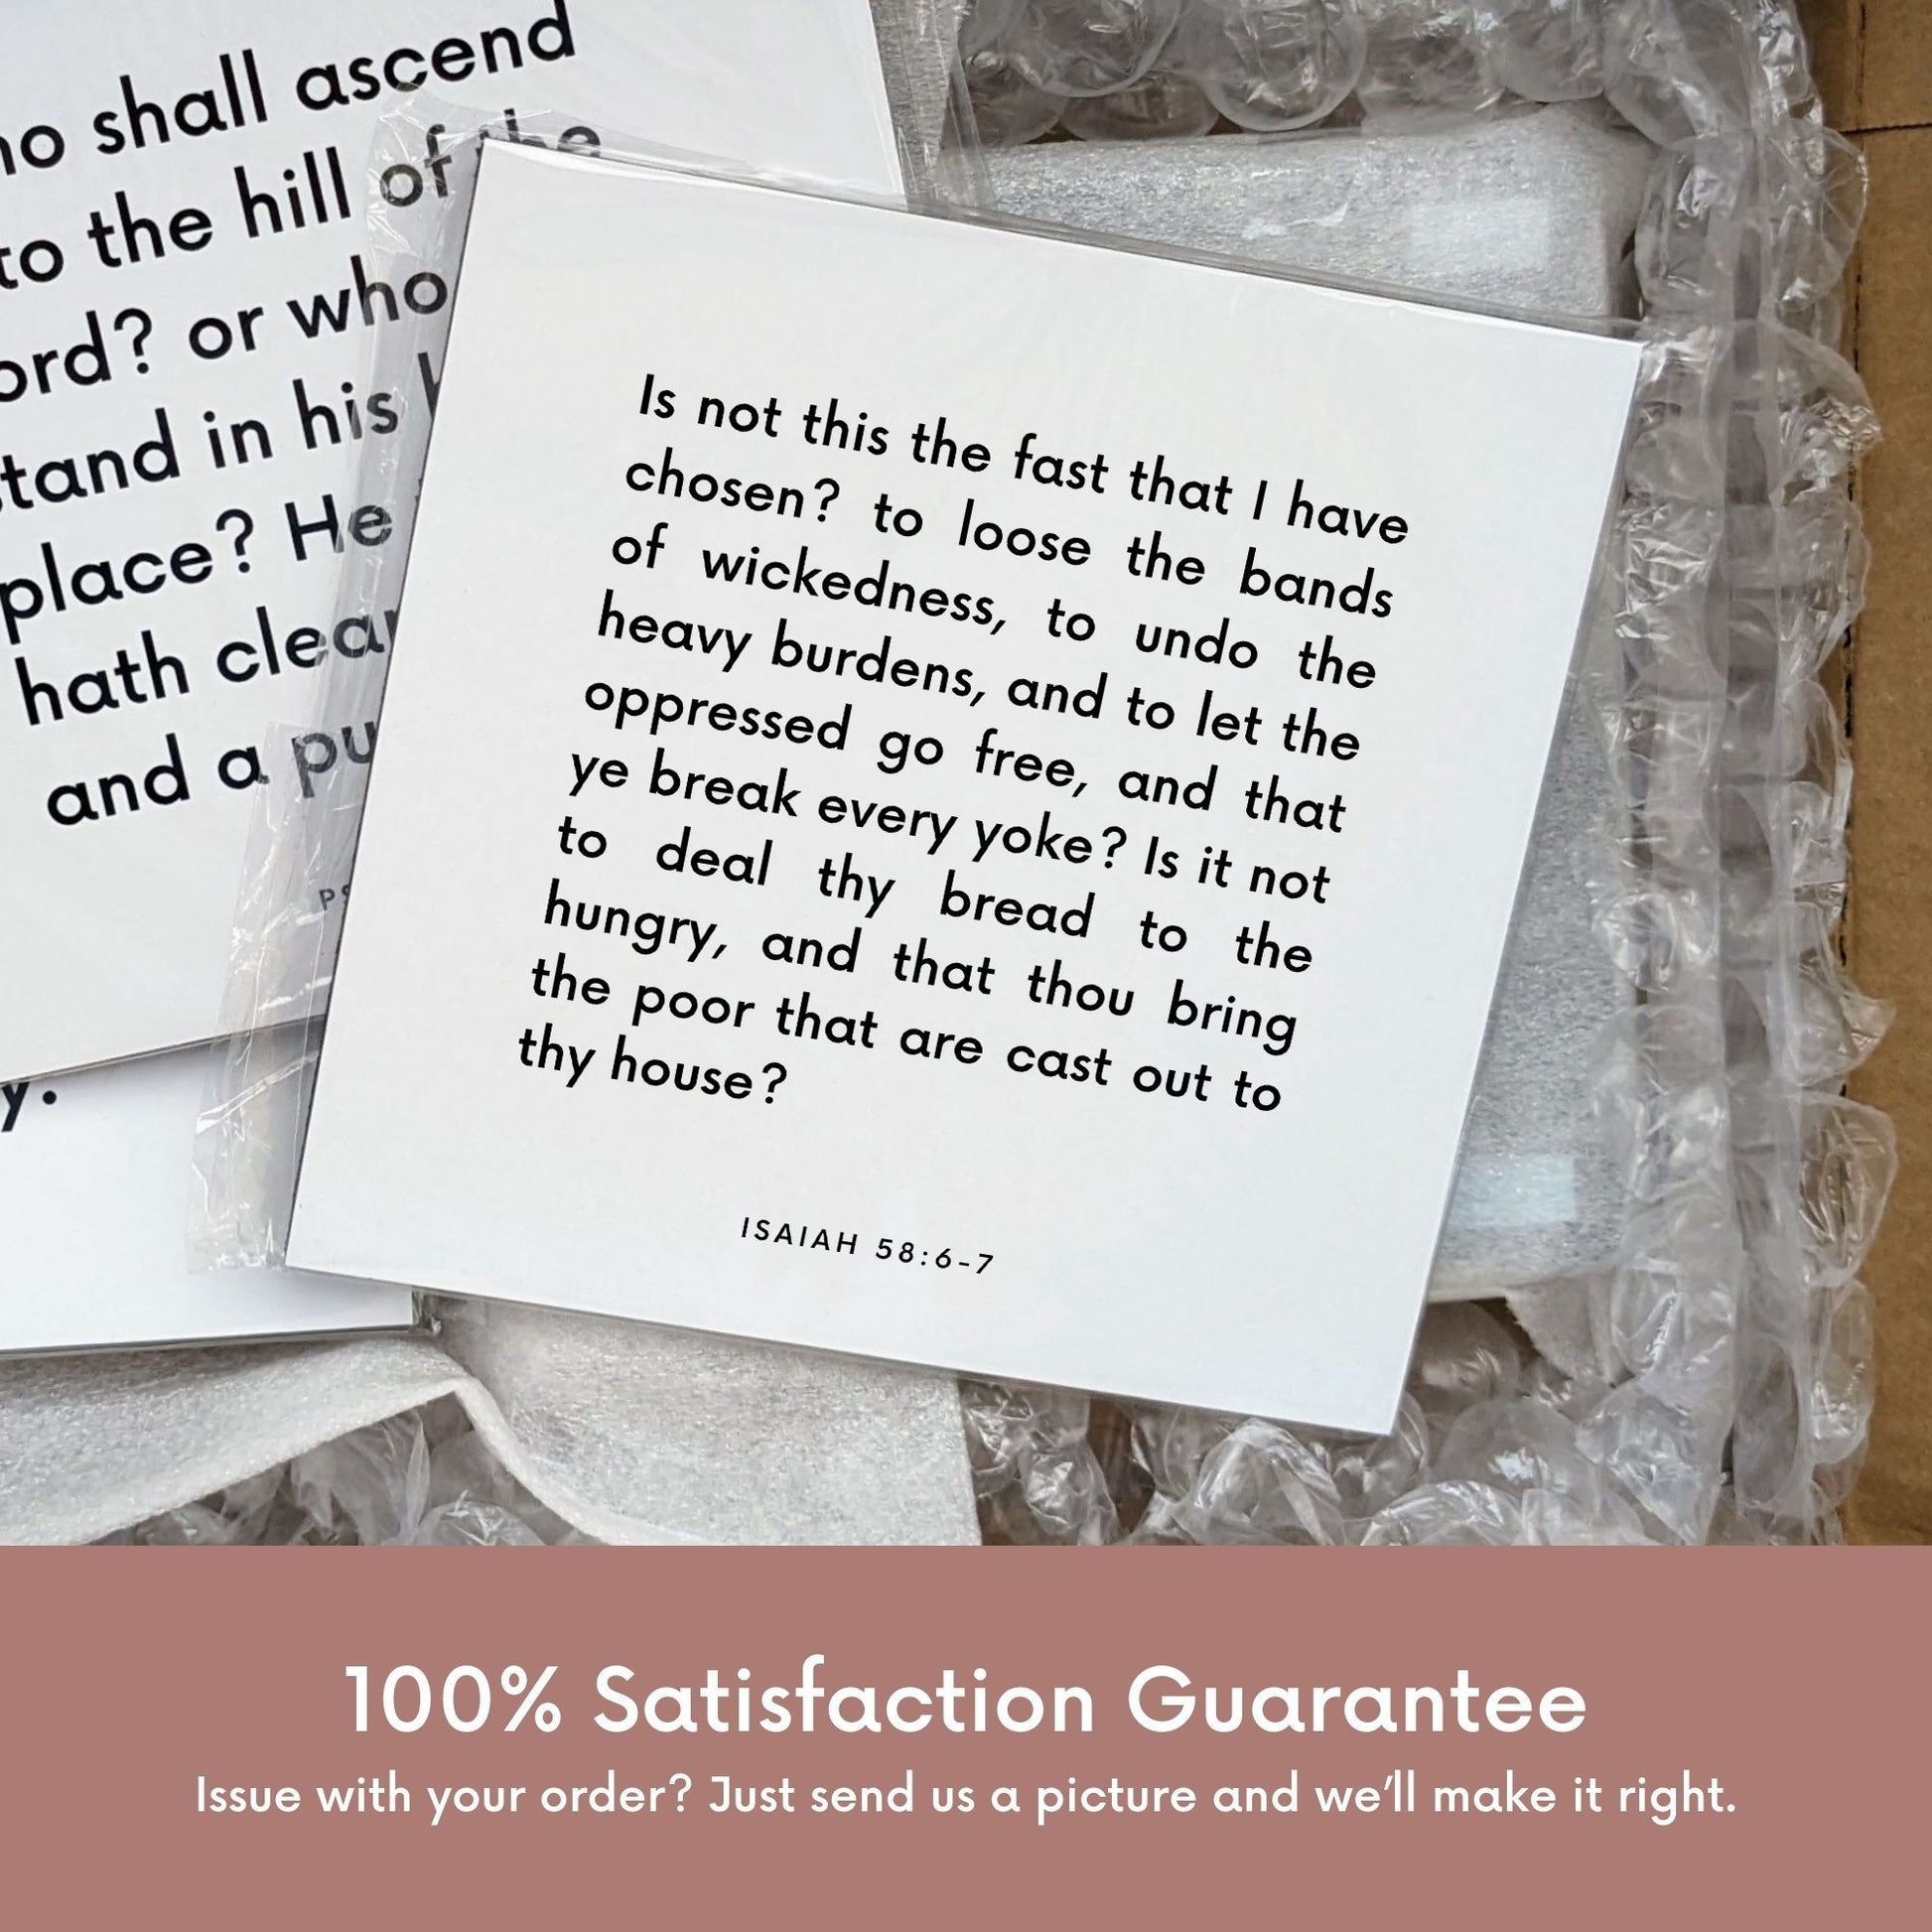 Shipping materials for scripture tile of Isaiah 58:6-7 - "Is not this the fast that I have chosen?"